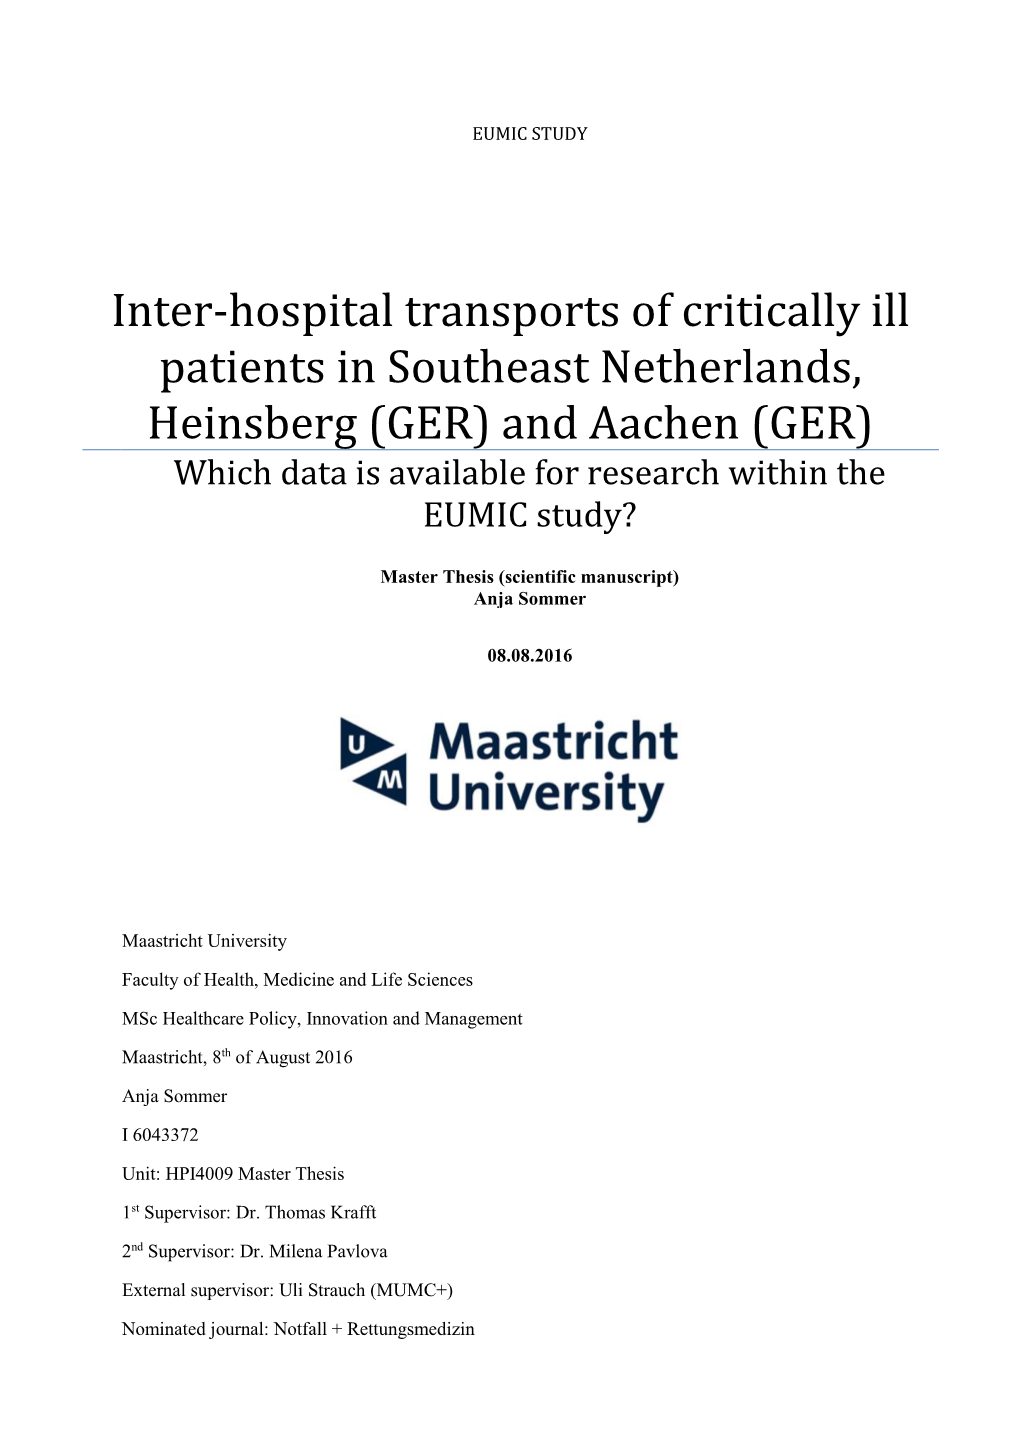 Inter-Hospital Transports of Critically Ill Patients in Southeast Netherlands